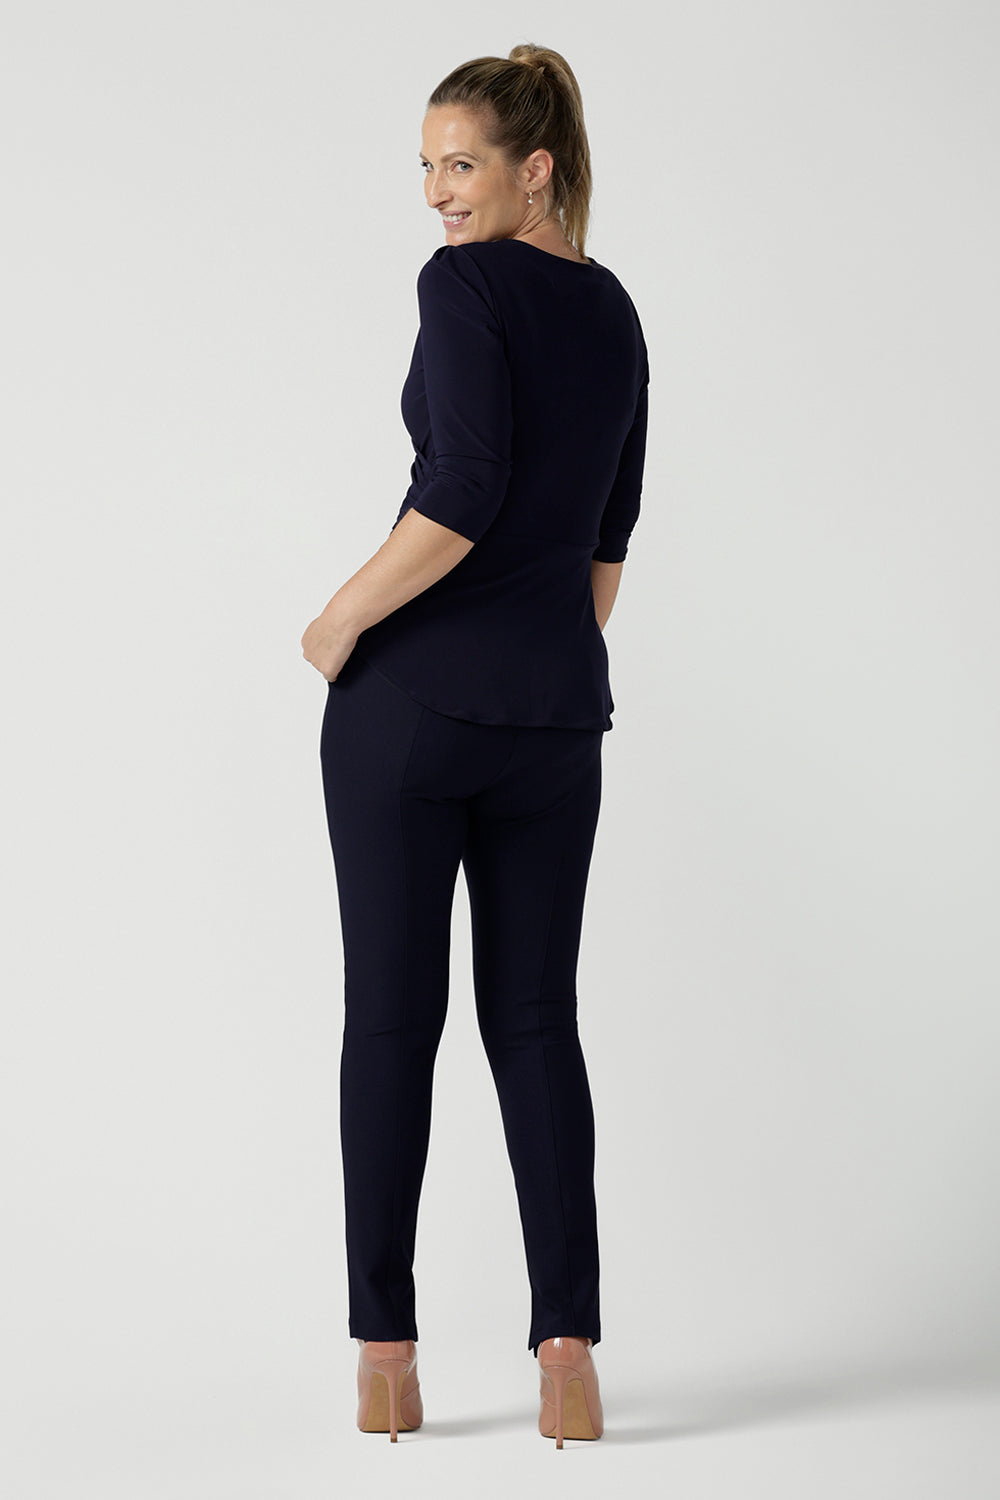 Back view of a size 10 model wears the Kyle Top in Navy made in Australia for women size 8 - 24. A fixed wrap top in Navy with 3/4 sleeves and a fixed wrap. Pleated from and v-neckline. A versatile work to dinner date top. Made in Australia for women size 8 - 24. Styled back with Navy Brooklyn pants.